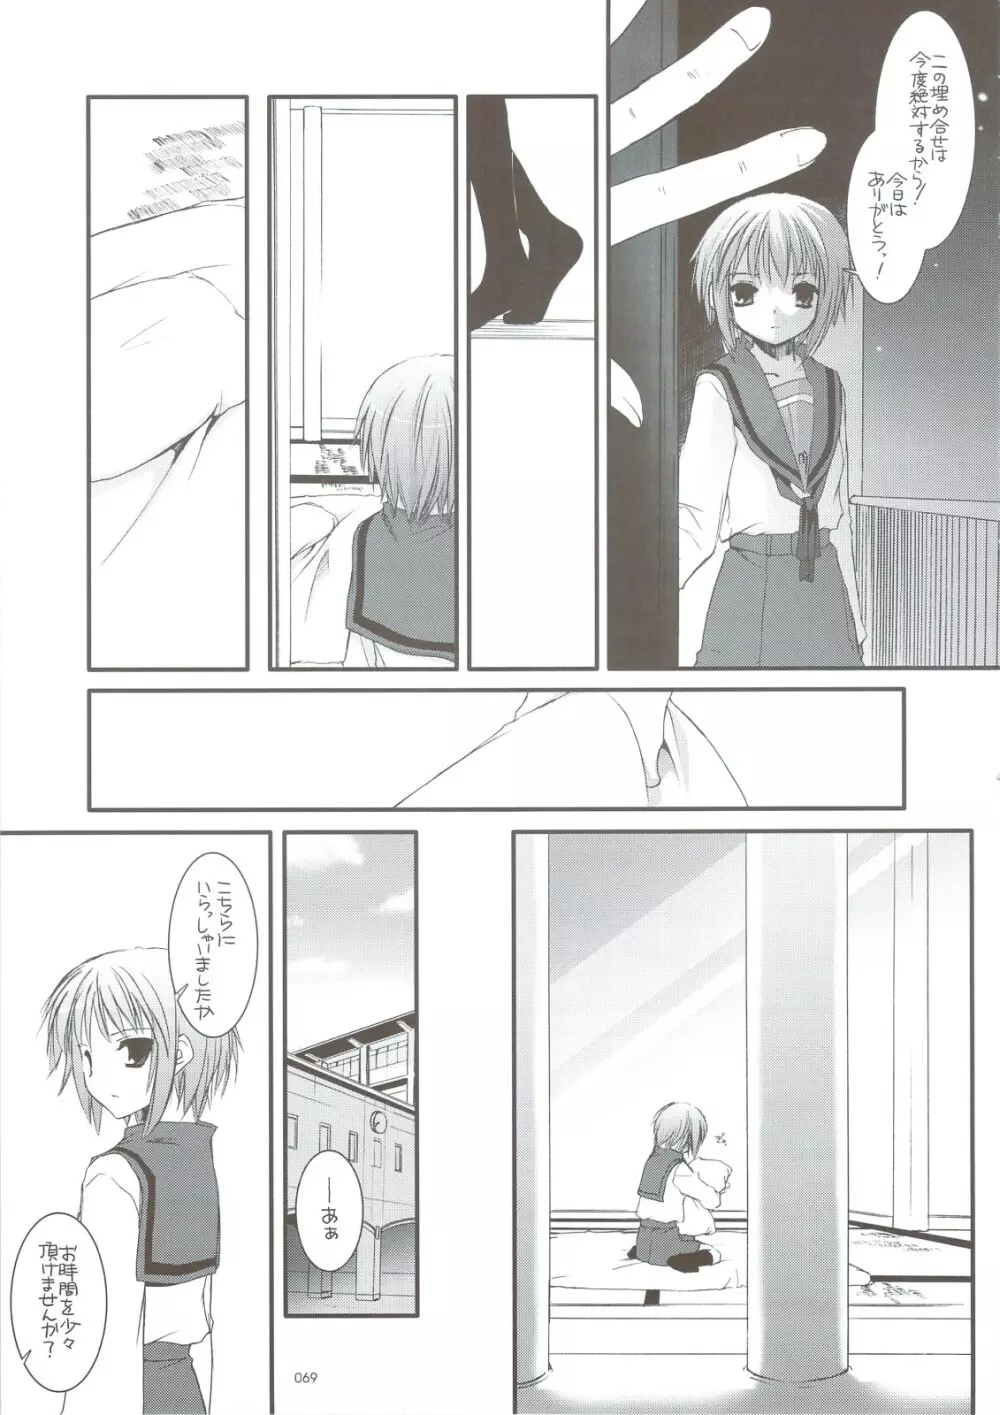 DL-SOS 総集編 - page66